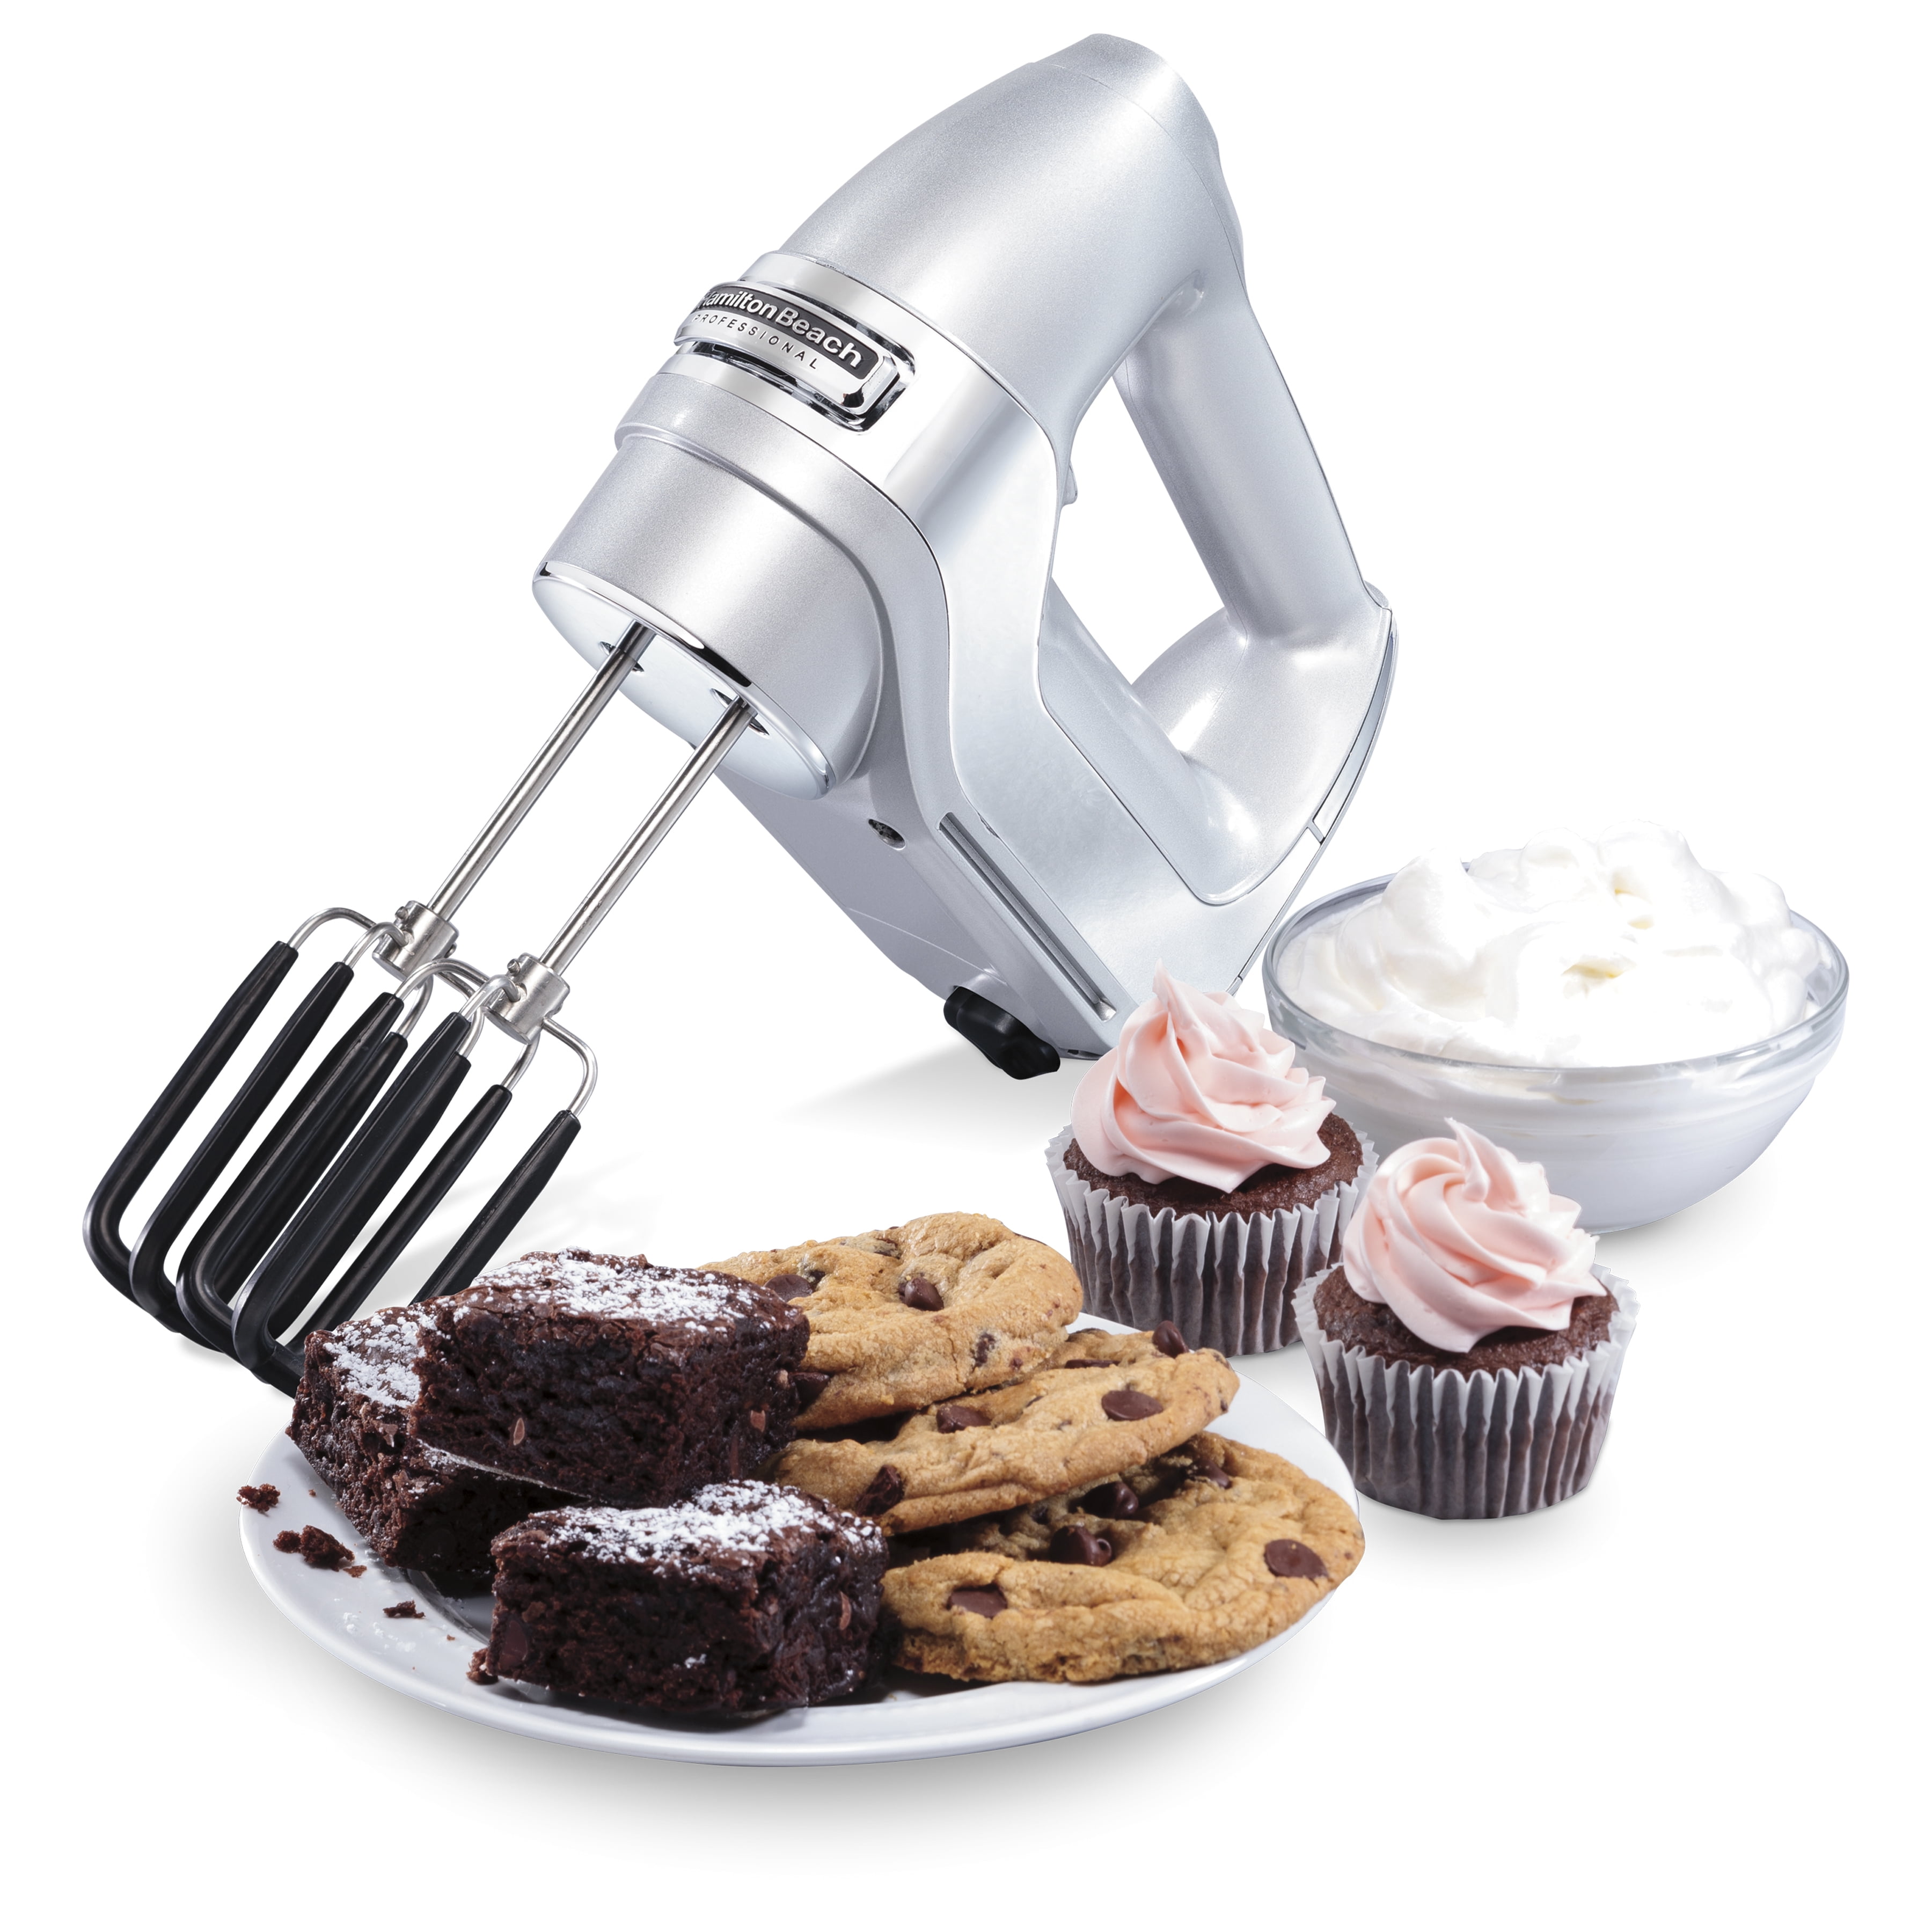 Hamilton Beach Professional The Hamilton Beach Professional 7 Speed Hand  Mixer has a speed for every recipe, a slow start to prevent splatters and a  QuickBurst at every level. It includes stainless